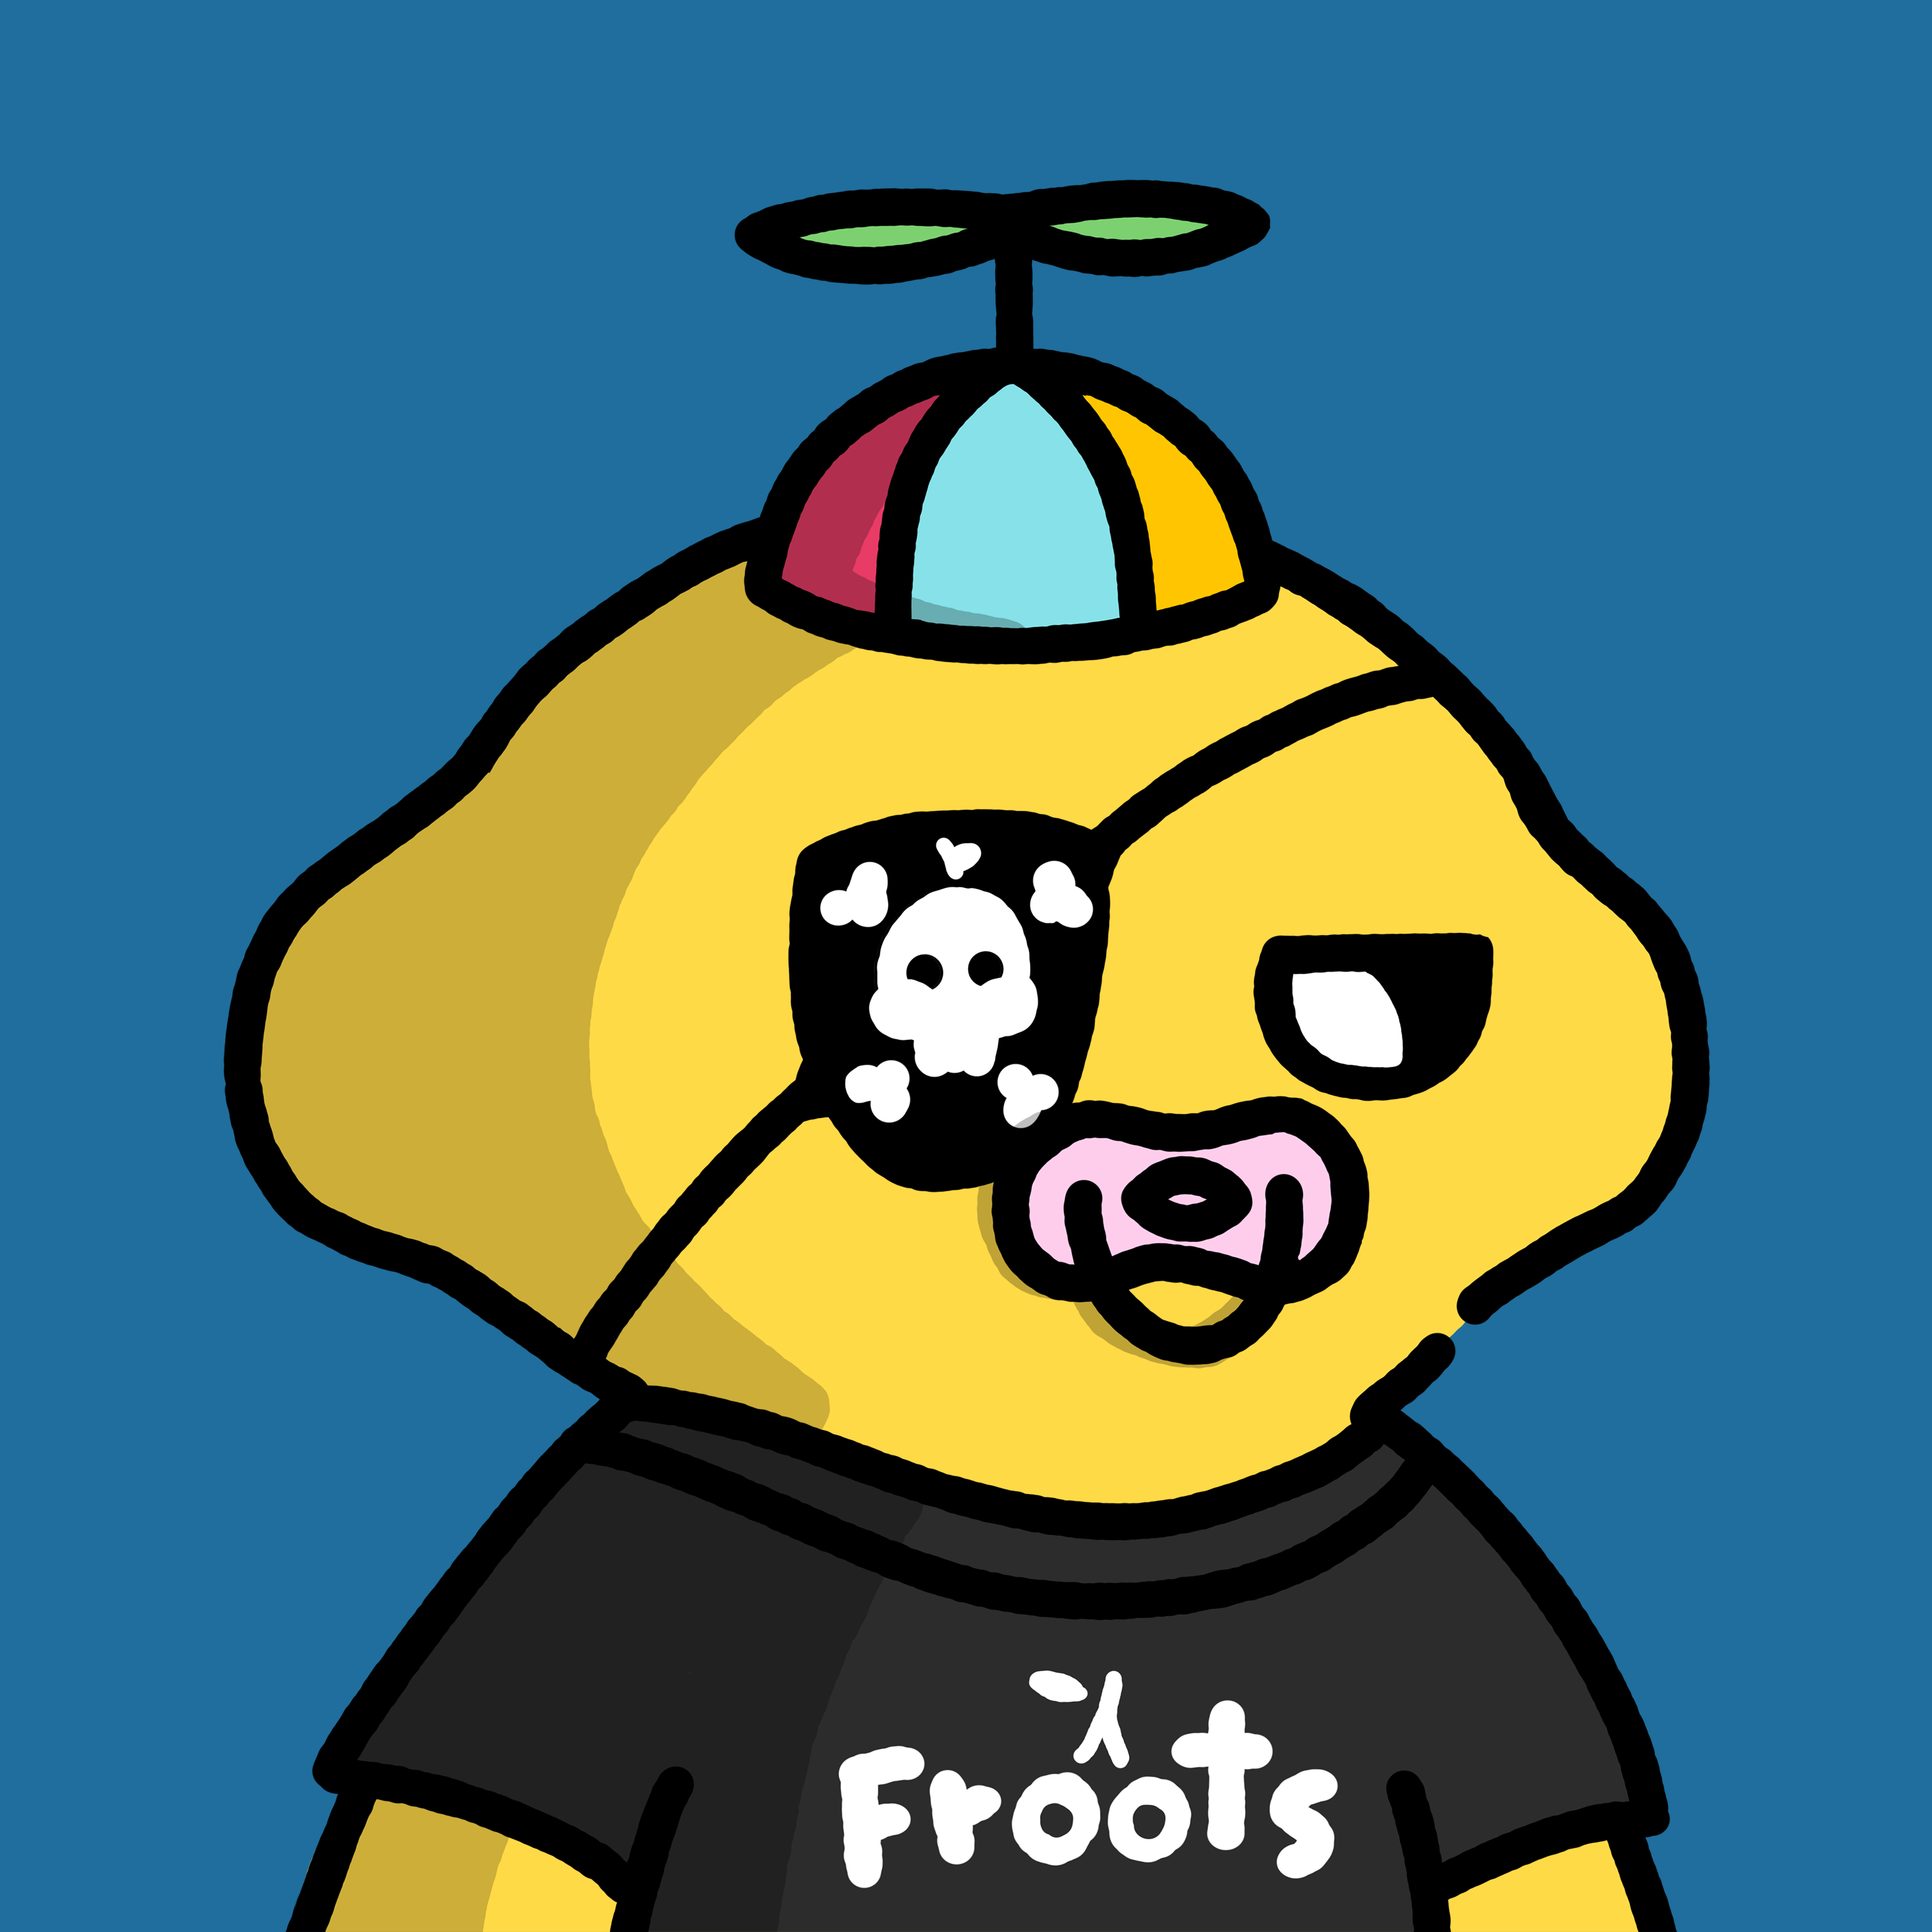 Froots #2560